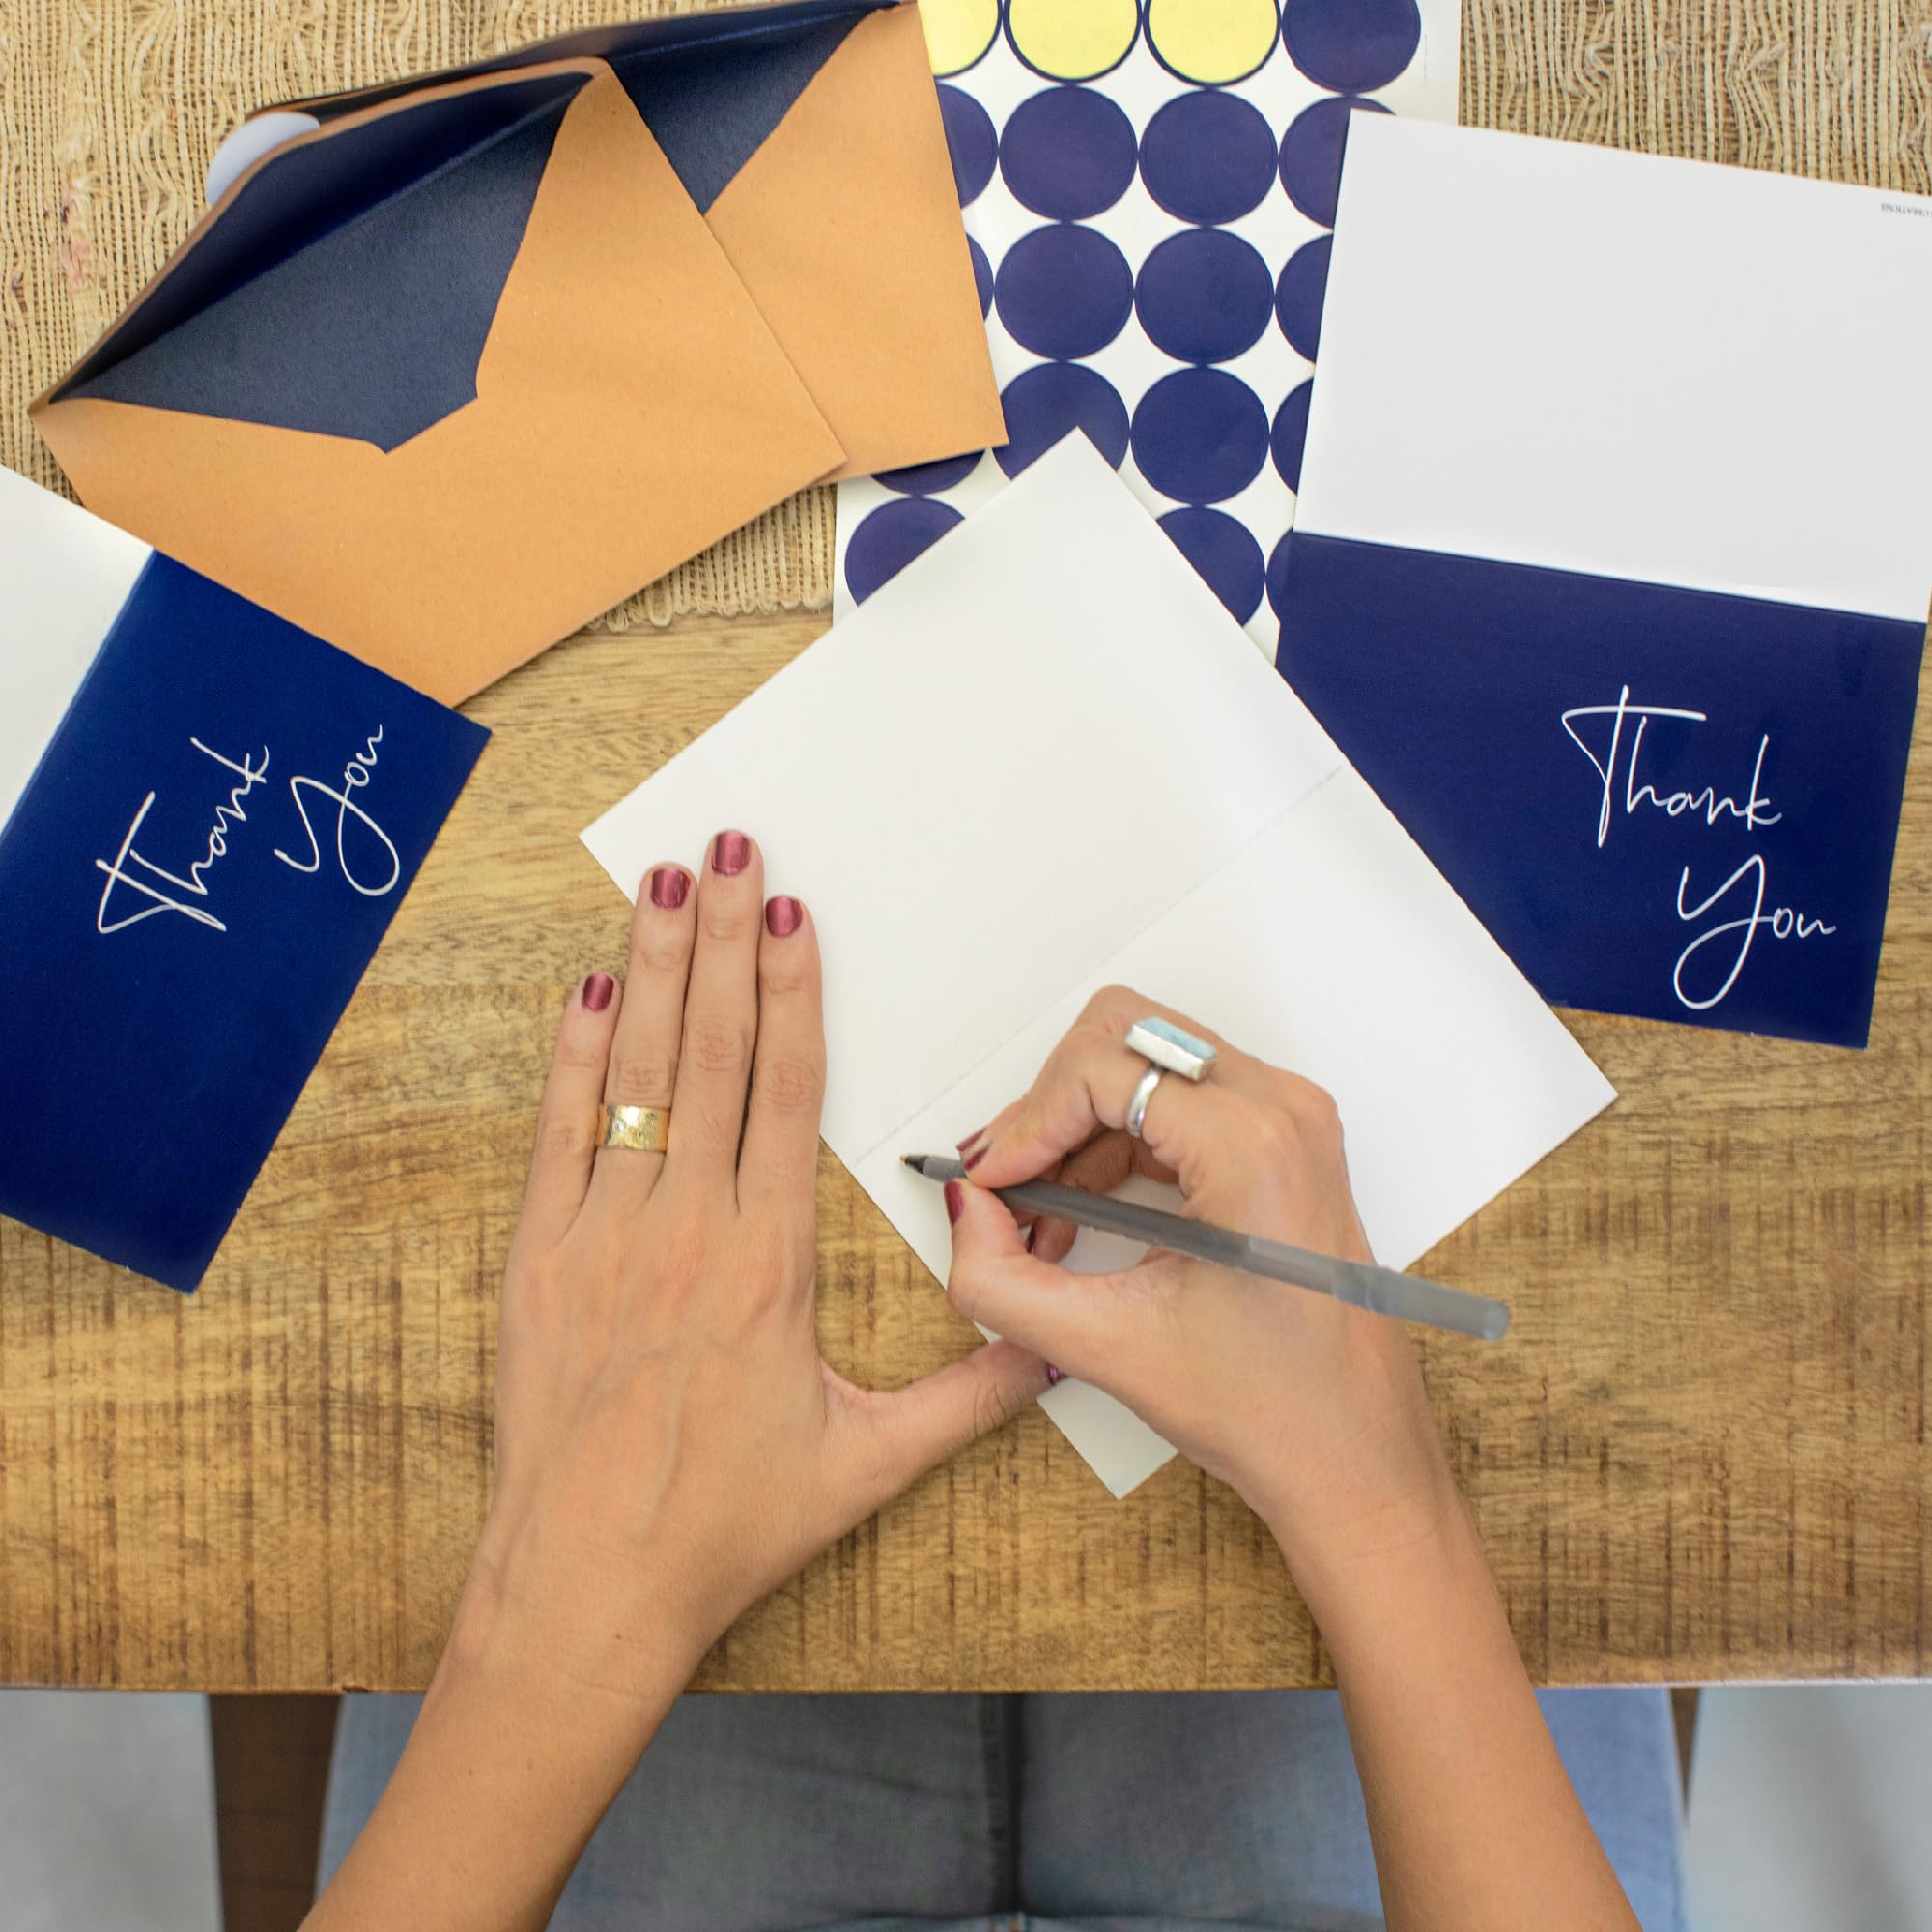 VNS Creations 100 pack Thank You Cards with Envelopes & Stickers - Classy 4x6 Blank Thank You Cards Bulk Box Set - Large Thank You Notes for Wedding, Small Business, Baby & Bridal Shower (Navy Blue)